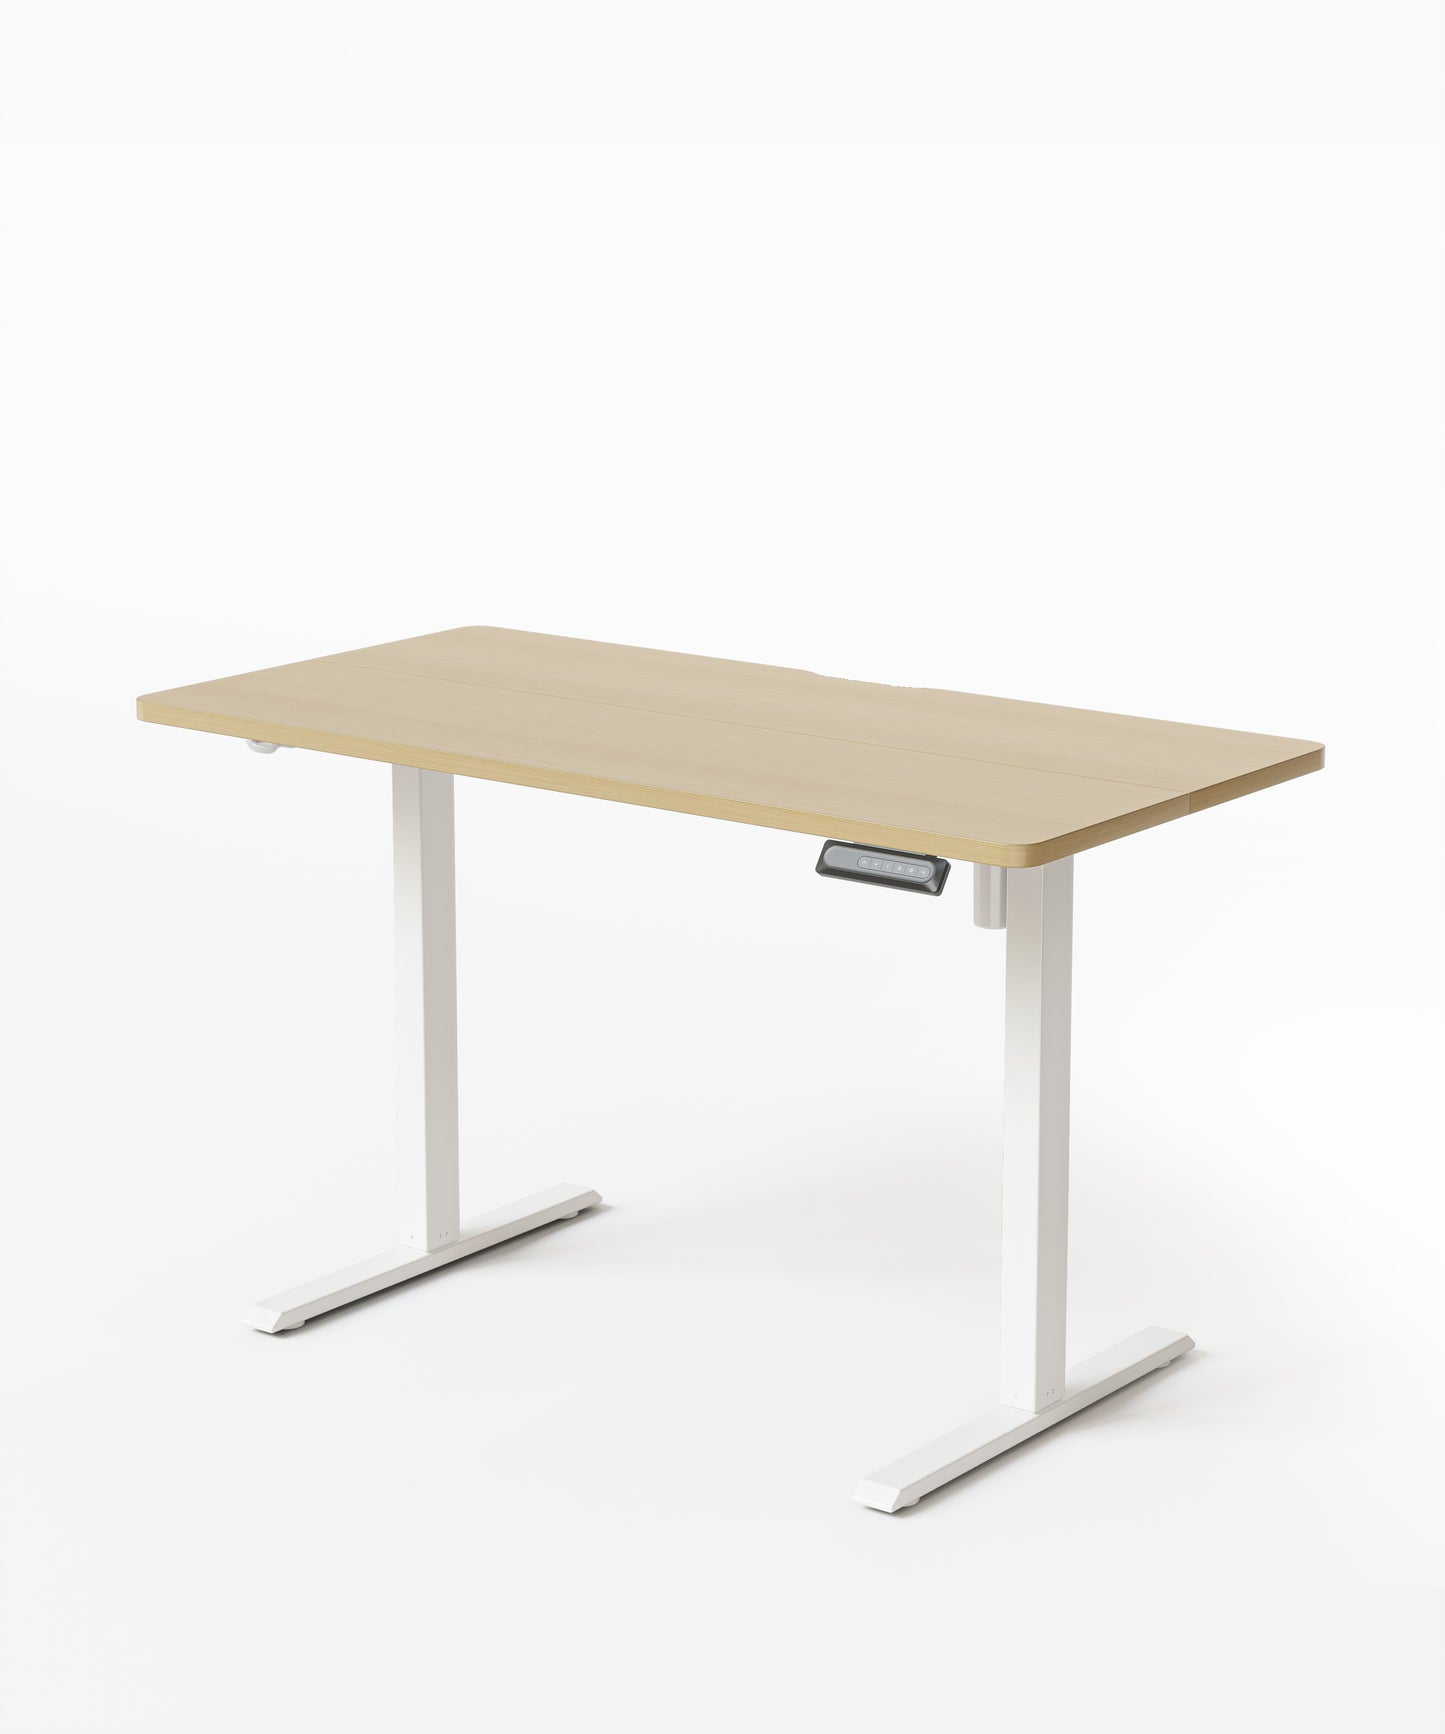 HUANUO ELECTRIC STANDING DESK ADJUSTABLE HEIGHT